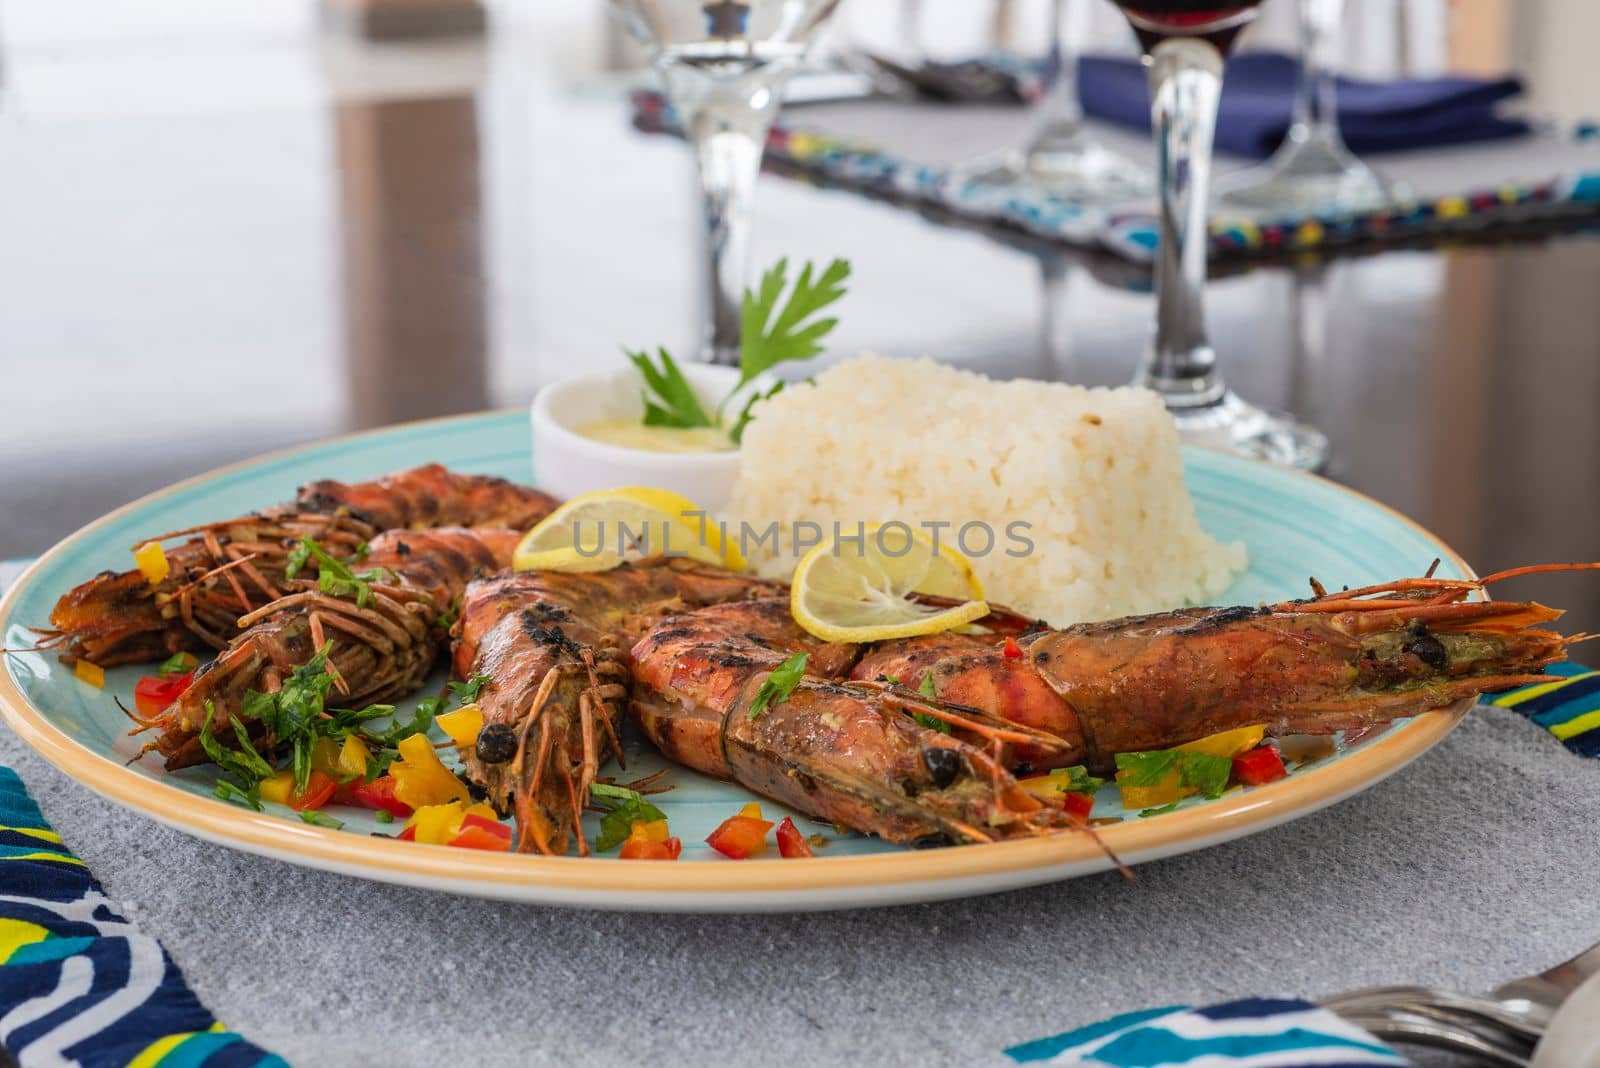 Tiger prawn shirmp a la carte meal with white rice by paulvinten